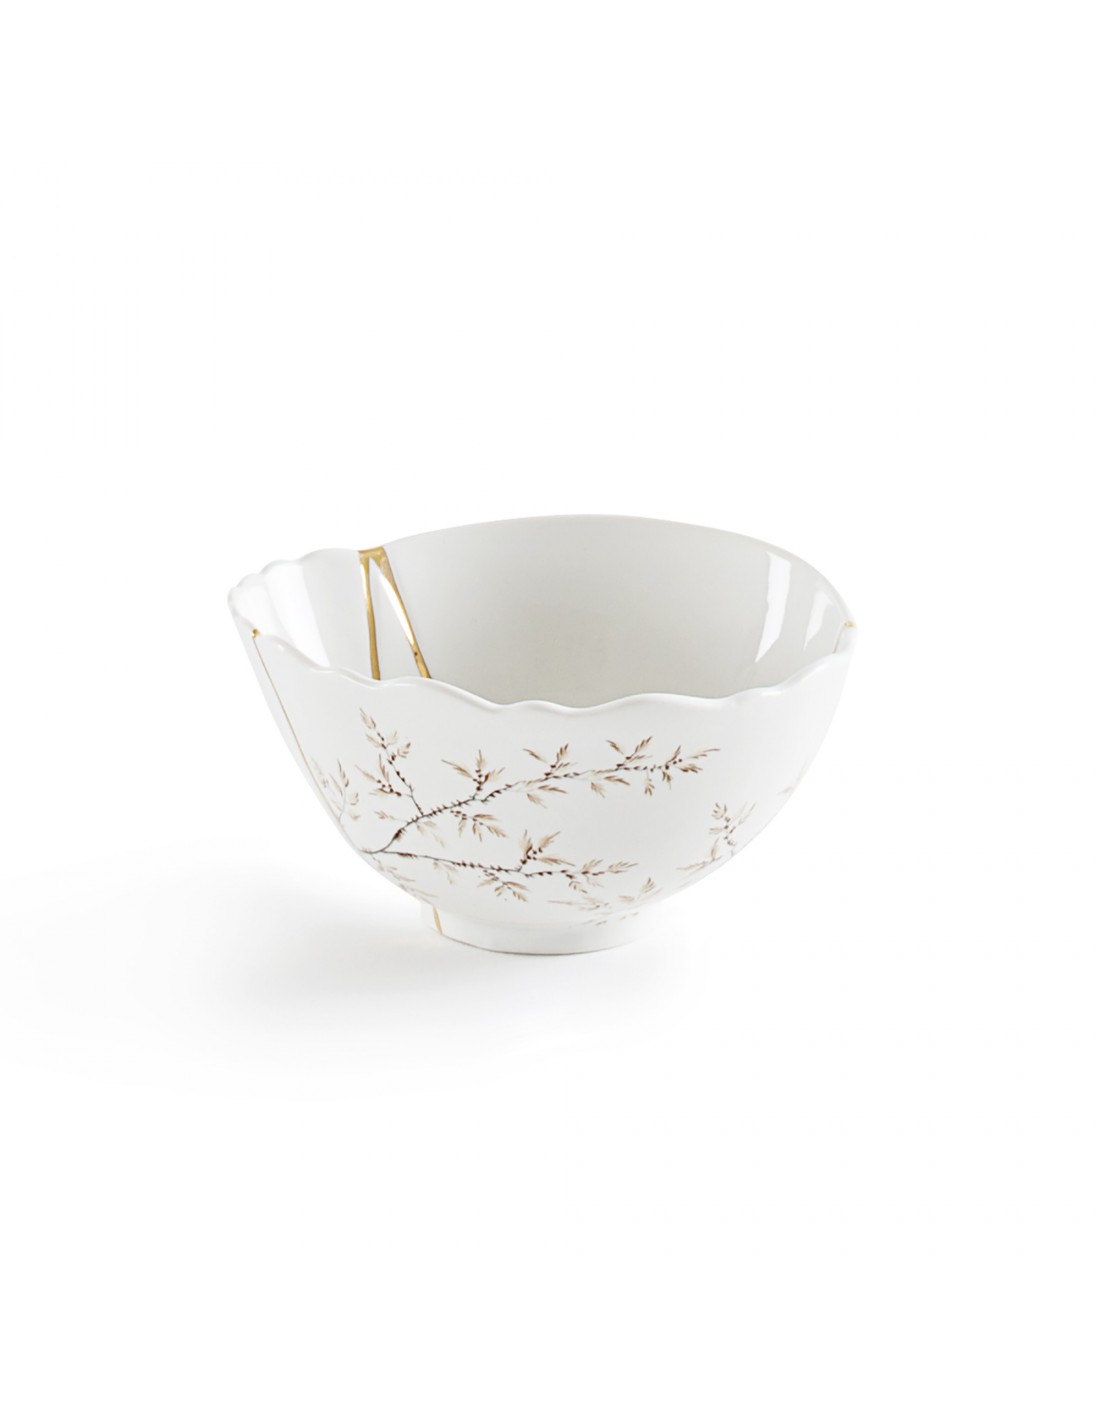 Buy SELETTI Fruit Bowl online? Fast and safe delivery!